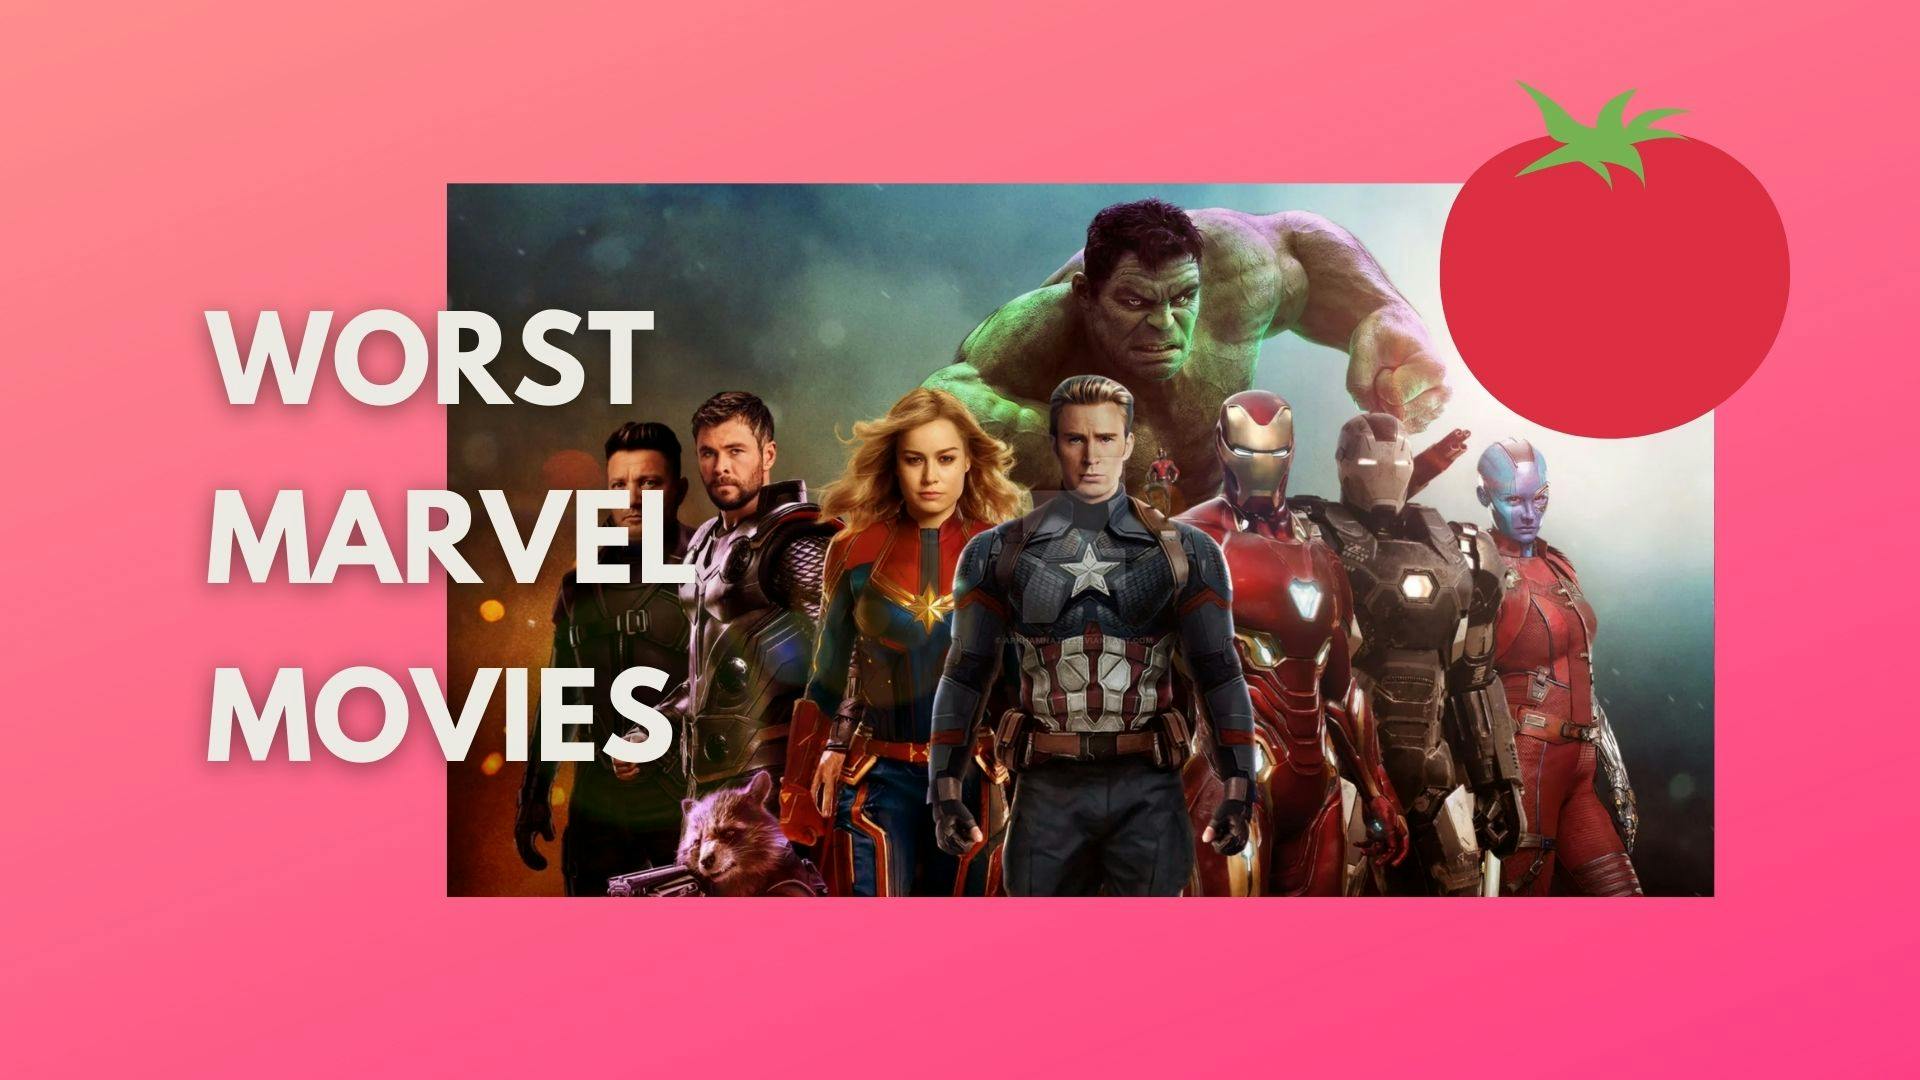 Top 5 Worst Marvel Movies till now according to Rotten Tomatoes